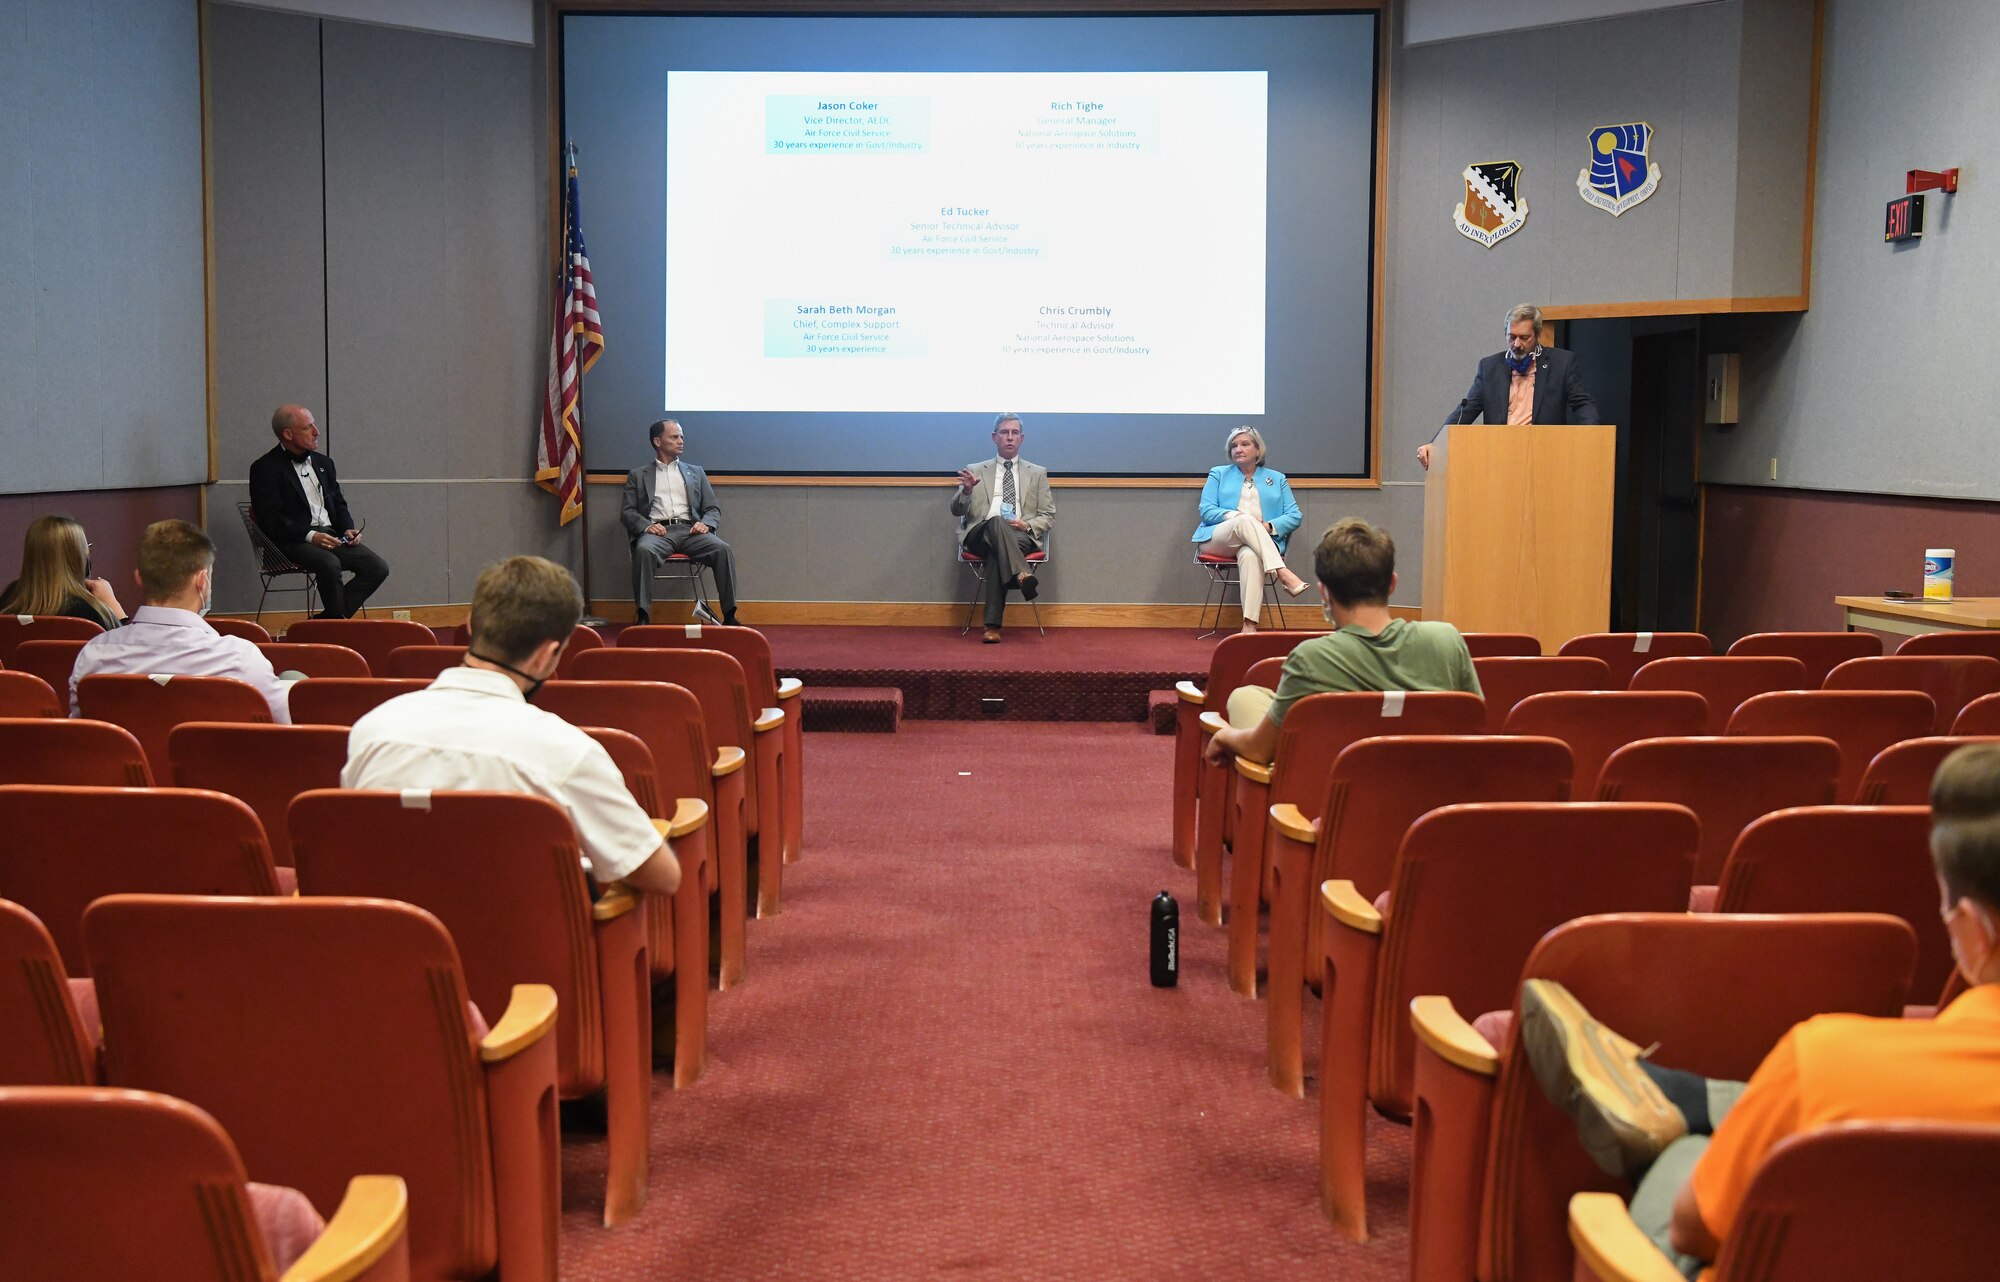 Senior leadership from the Arnold Engineering Development Complex (AEDC) and National Aerospace Solutions, LLC (NAS), the Test Operations and Sustainment Contractor for AEDC, answer questions from Air Force and NAS interns about career development July 15, 2020, during a presentation in the Main Auditorium at Arnold Air Force Base, Tenn. Pictured from left are Dr. Rich Tighe, NAS General Manager; Ed Tucker, AEDC Senior Technical Advisor; Jason Coker, AEDC Vice Director; Sarah Beth Morgan, Chief of Complex Support for AEDC; and Chris Crumbly, Technical Director for NAS. (U.S. Air Force photo by Jill Pickett)